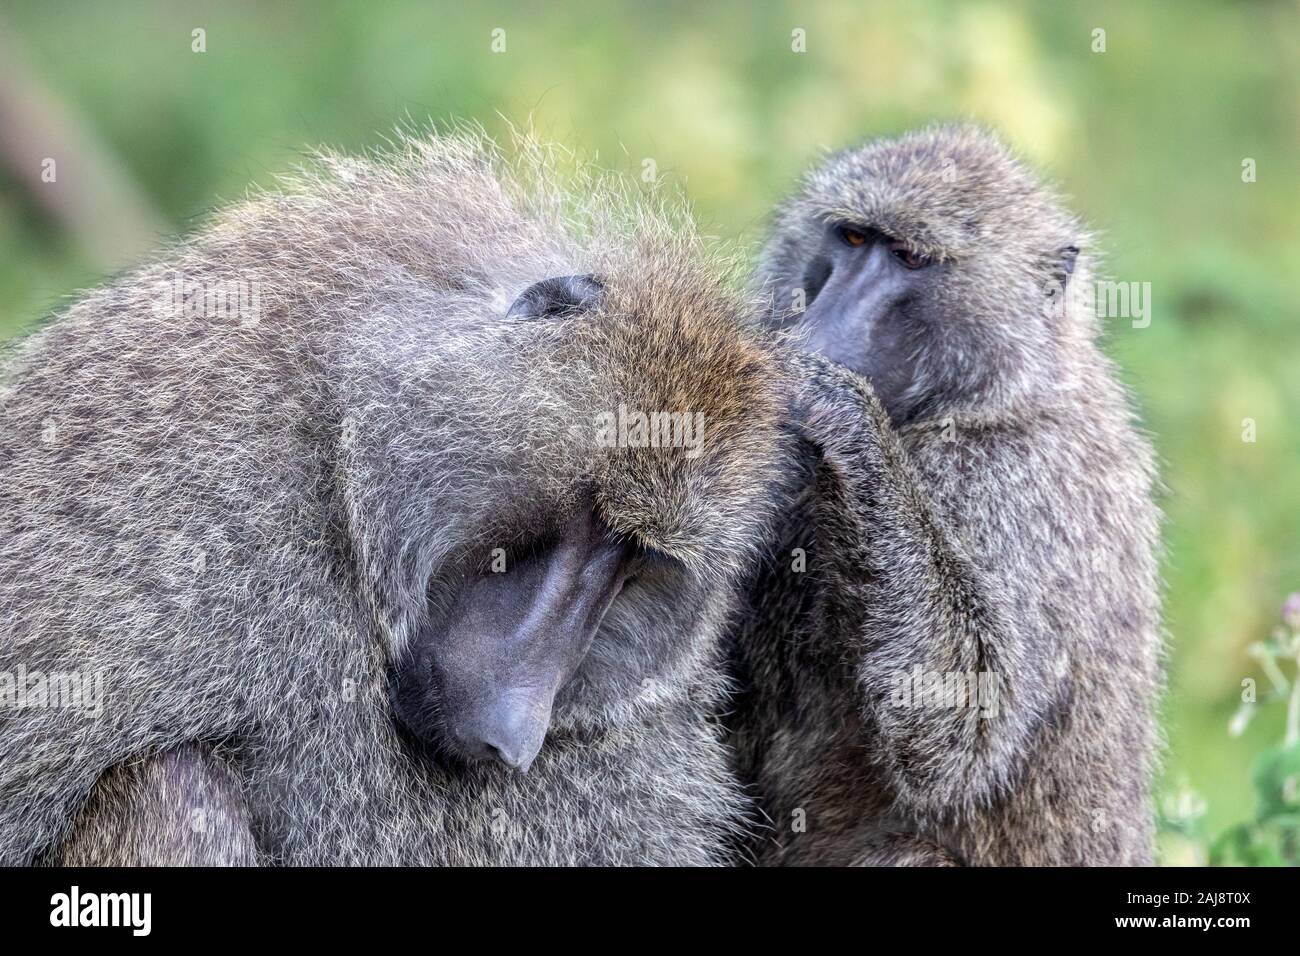 A close-up photo of two Olive Baboons sitting close together showing grooming behavior with a natural background in a game reserve in Kenya. Stock Photo